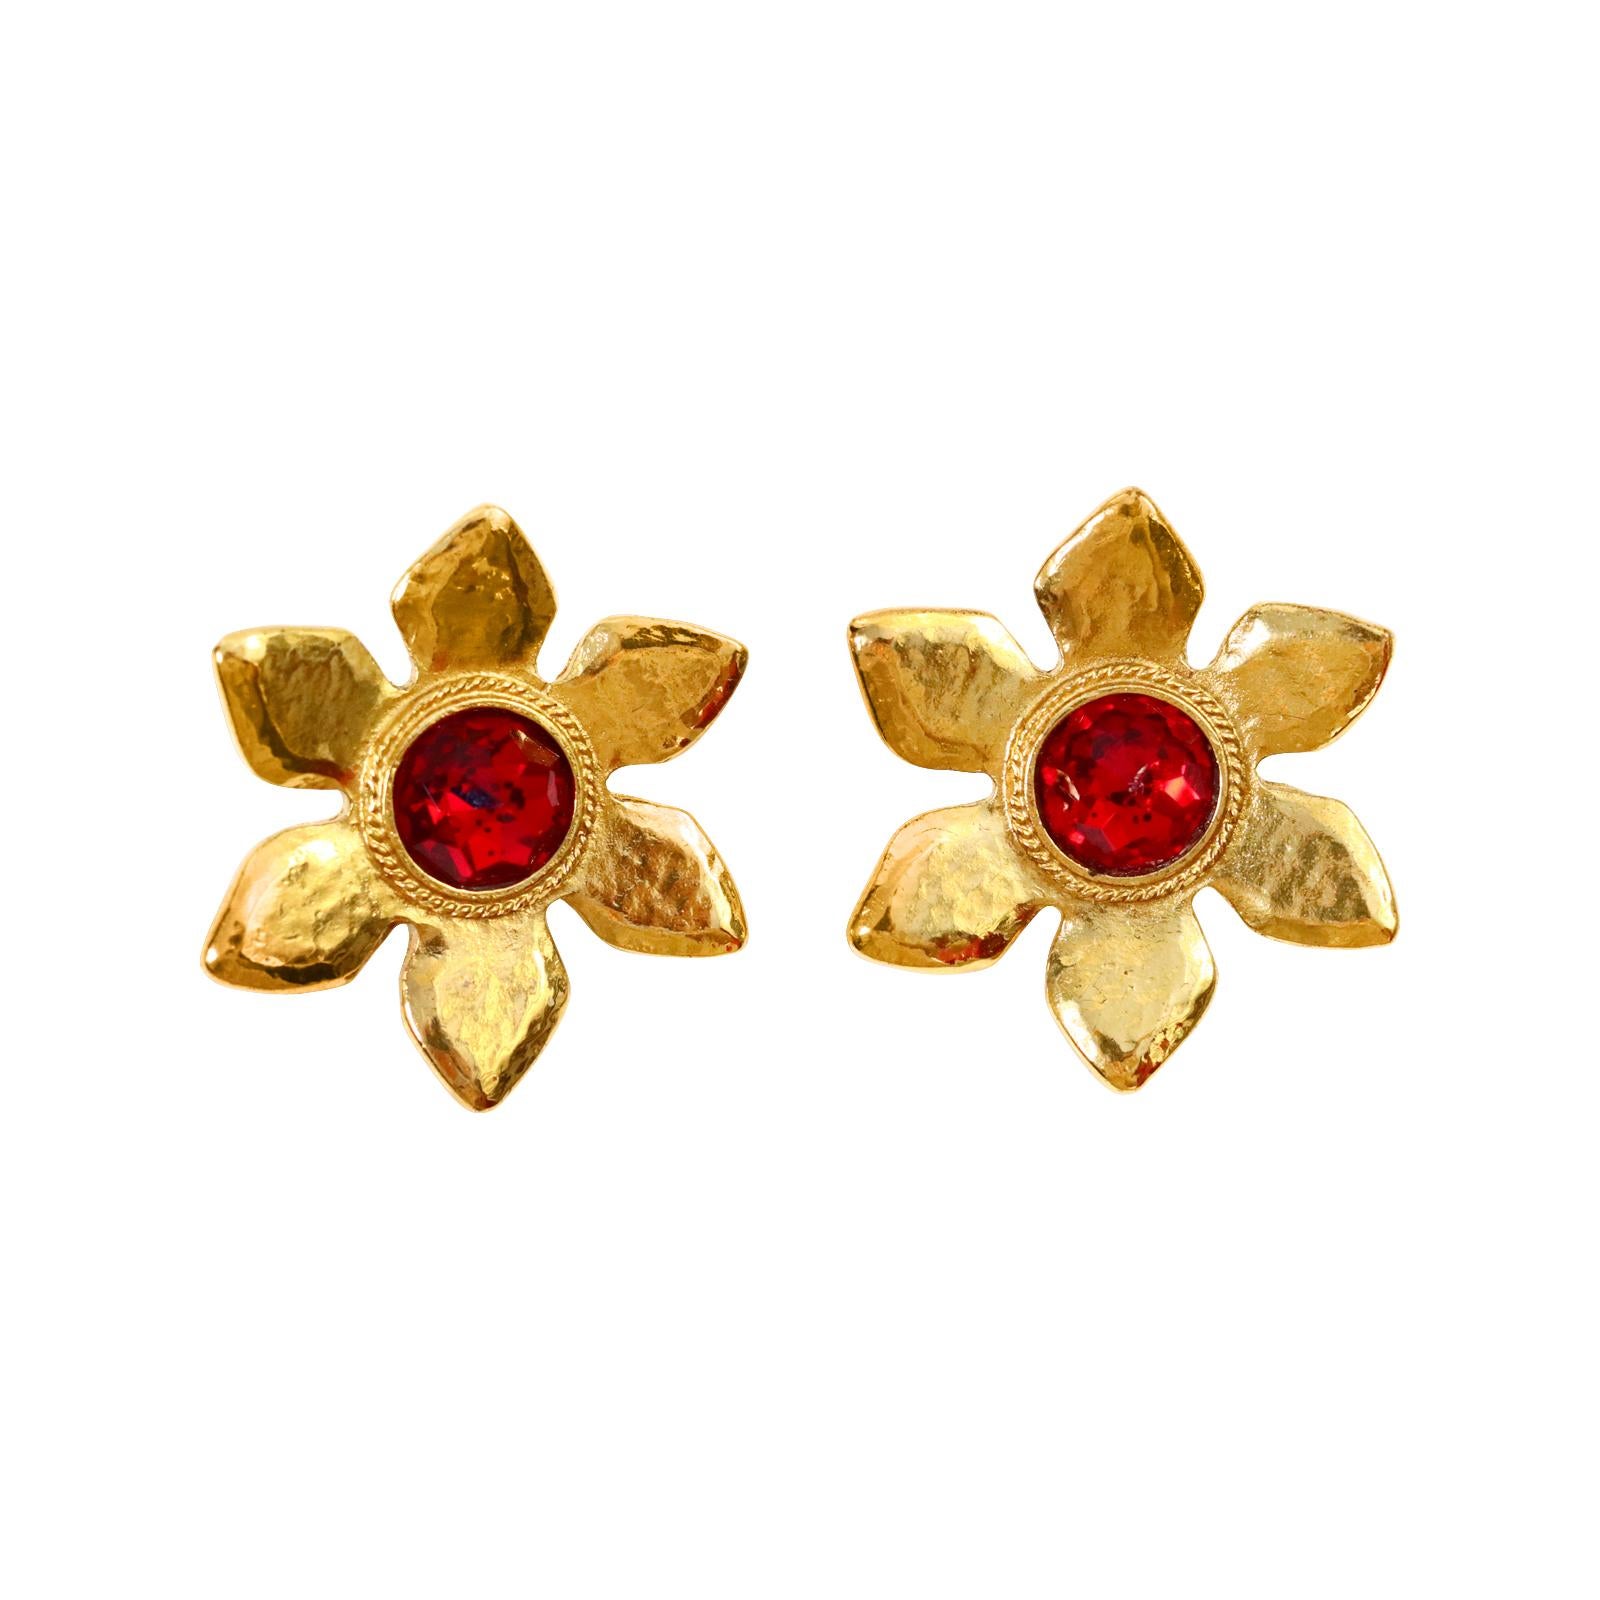 Vintage Yves Saint Laurent YSL Gold Flower with Red Center Earrings Circa 1980s. These will never go out of style and everyone will know what you are wearing. To me these always represent happiness.  Classic.
 Clip On